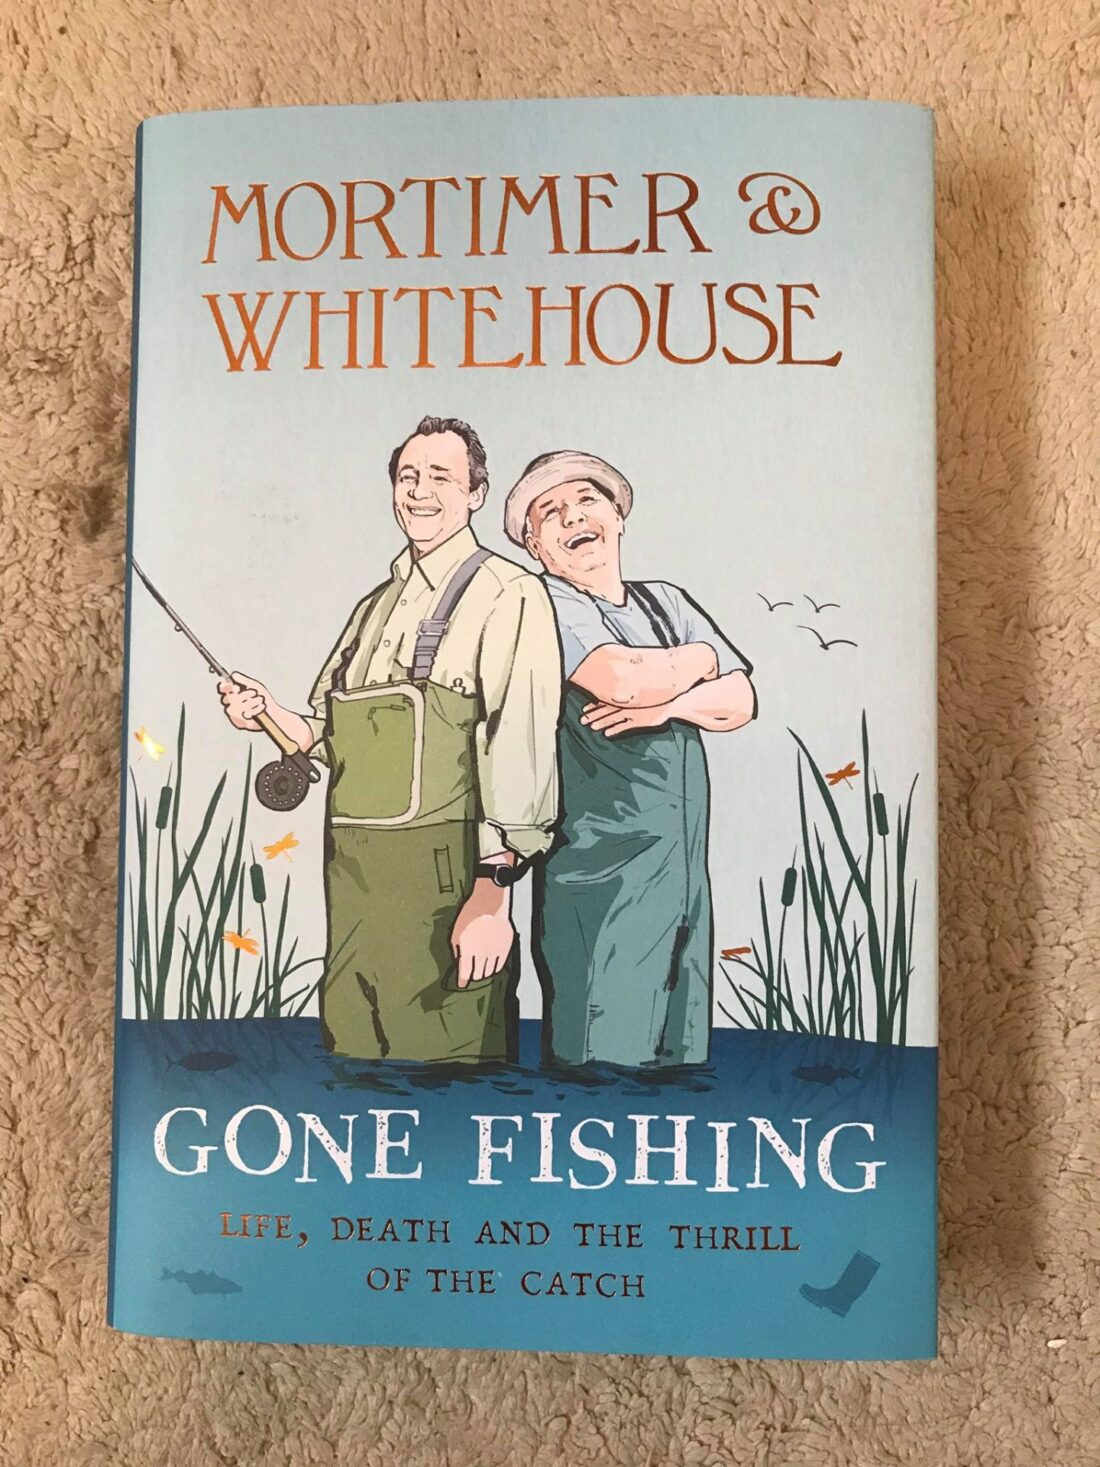 Mortimer & Whitehouse Gone Fishing Book Review – Against Men and Fish